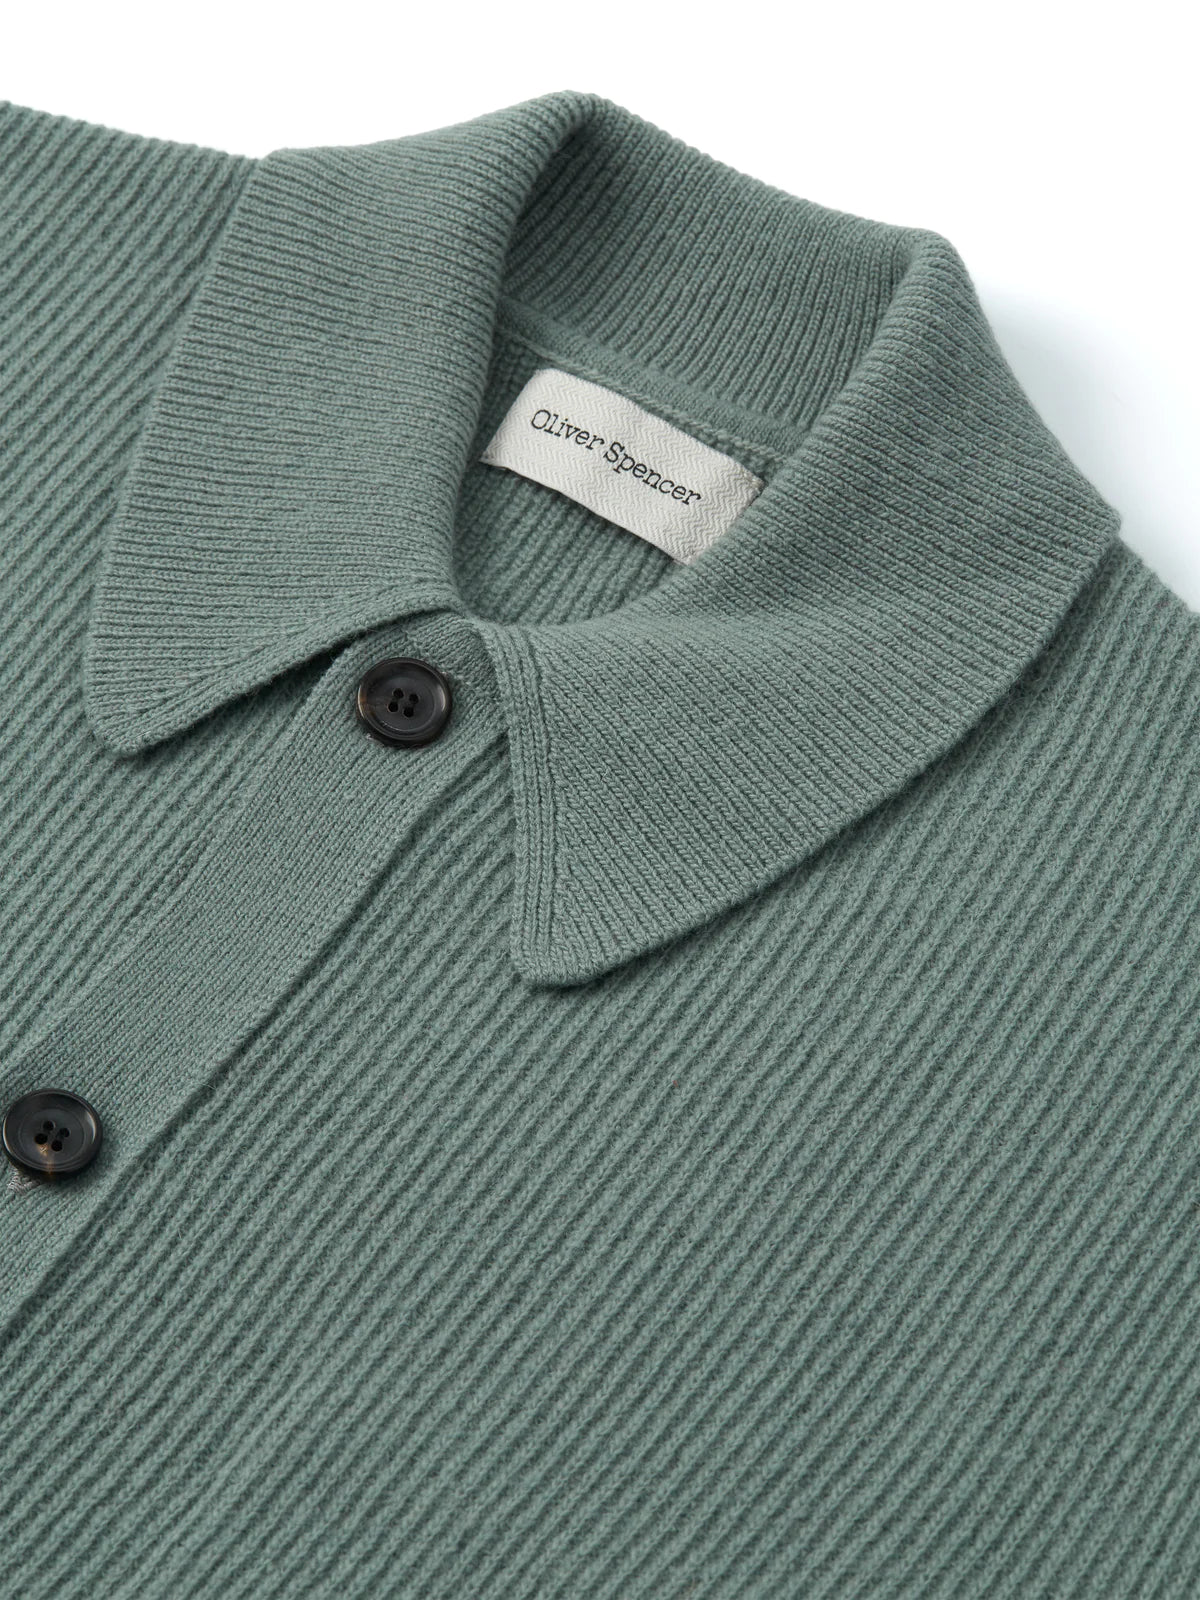 Oliver Spencer Britten Knitted Cardigan Sea Green